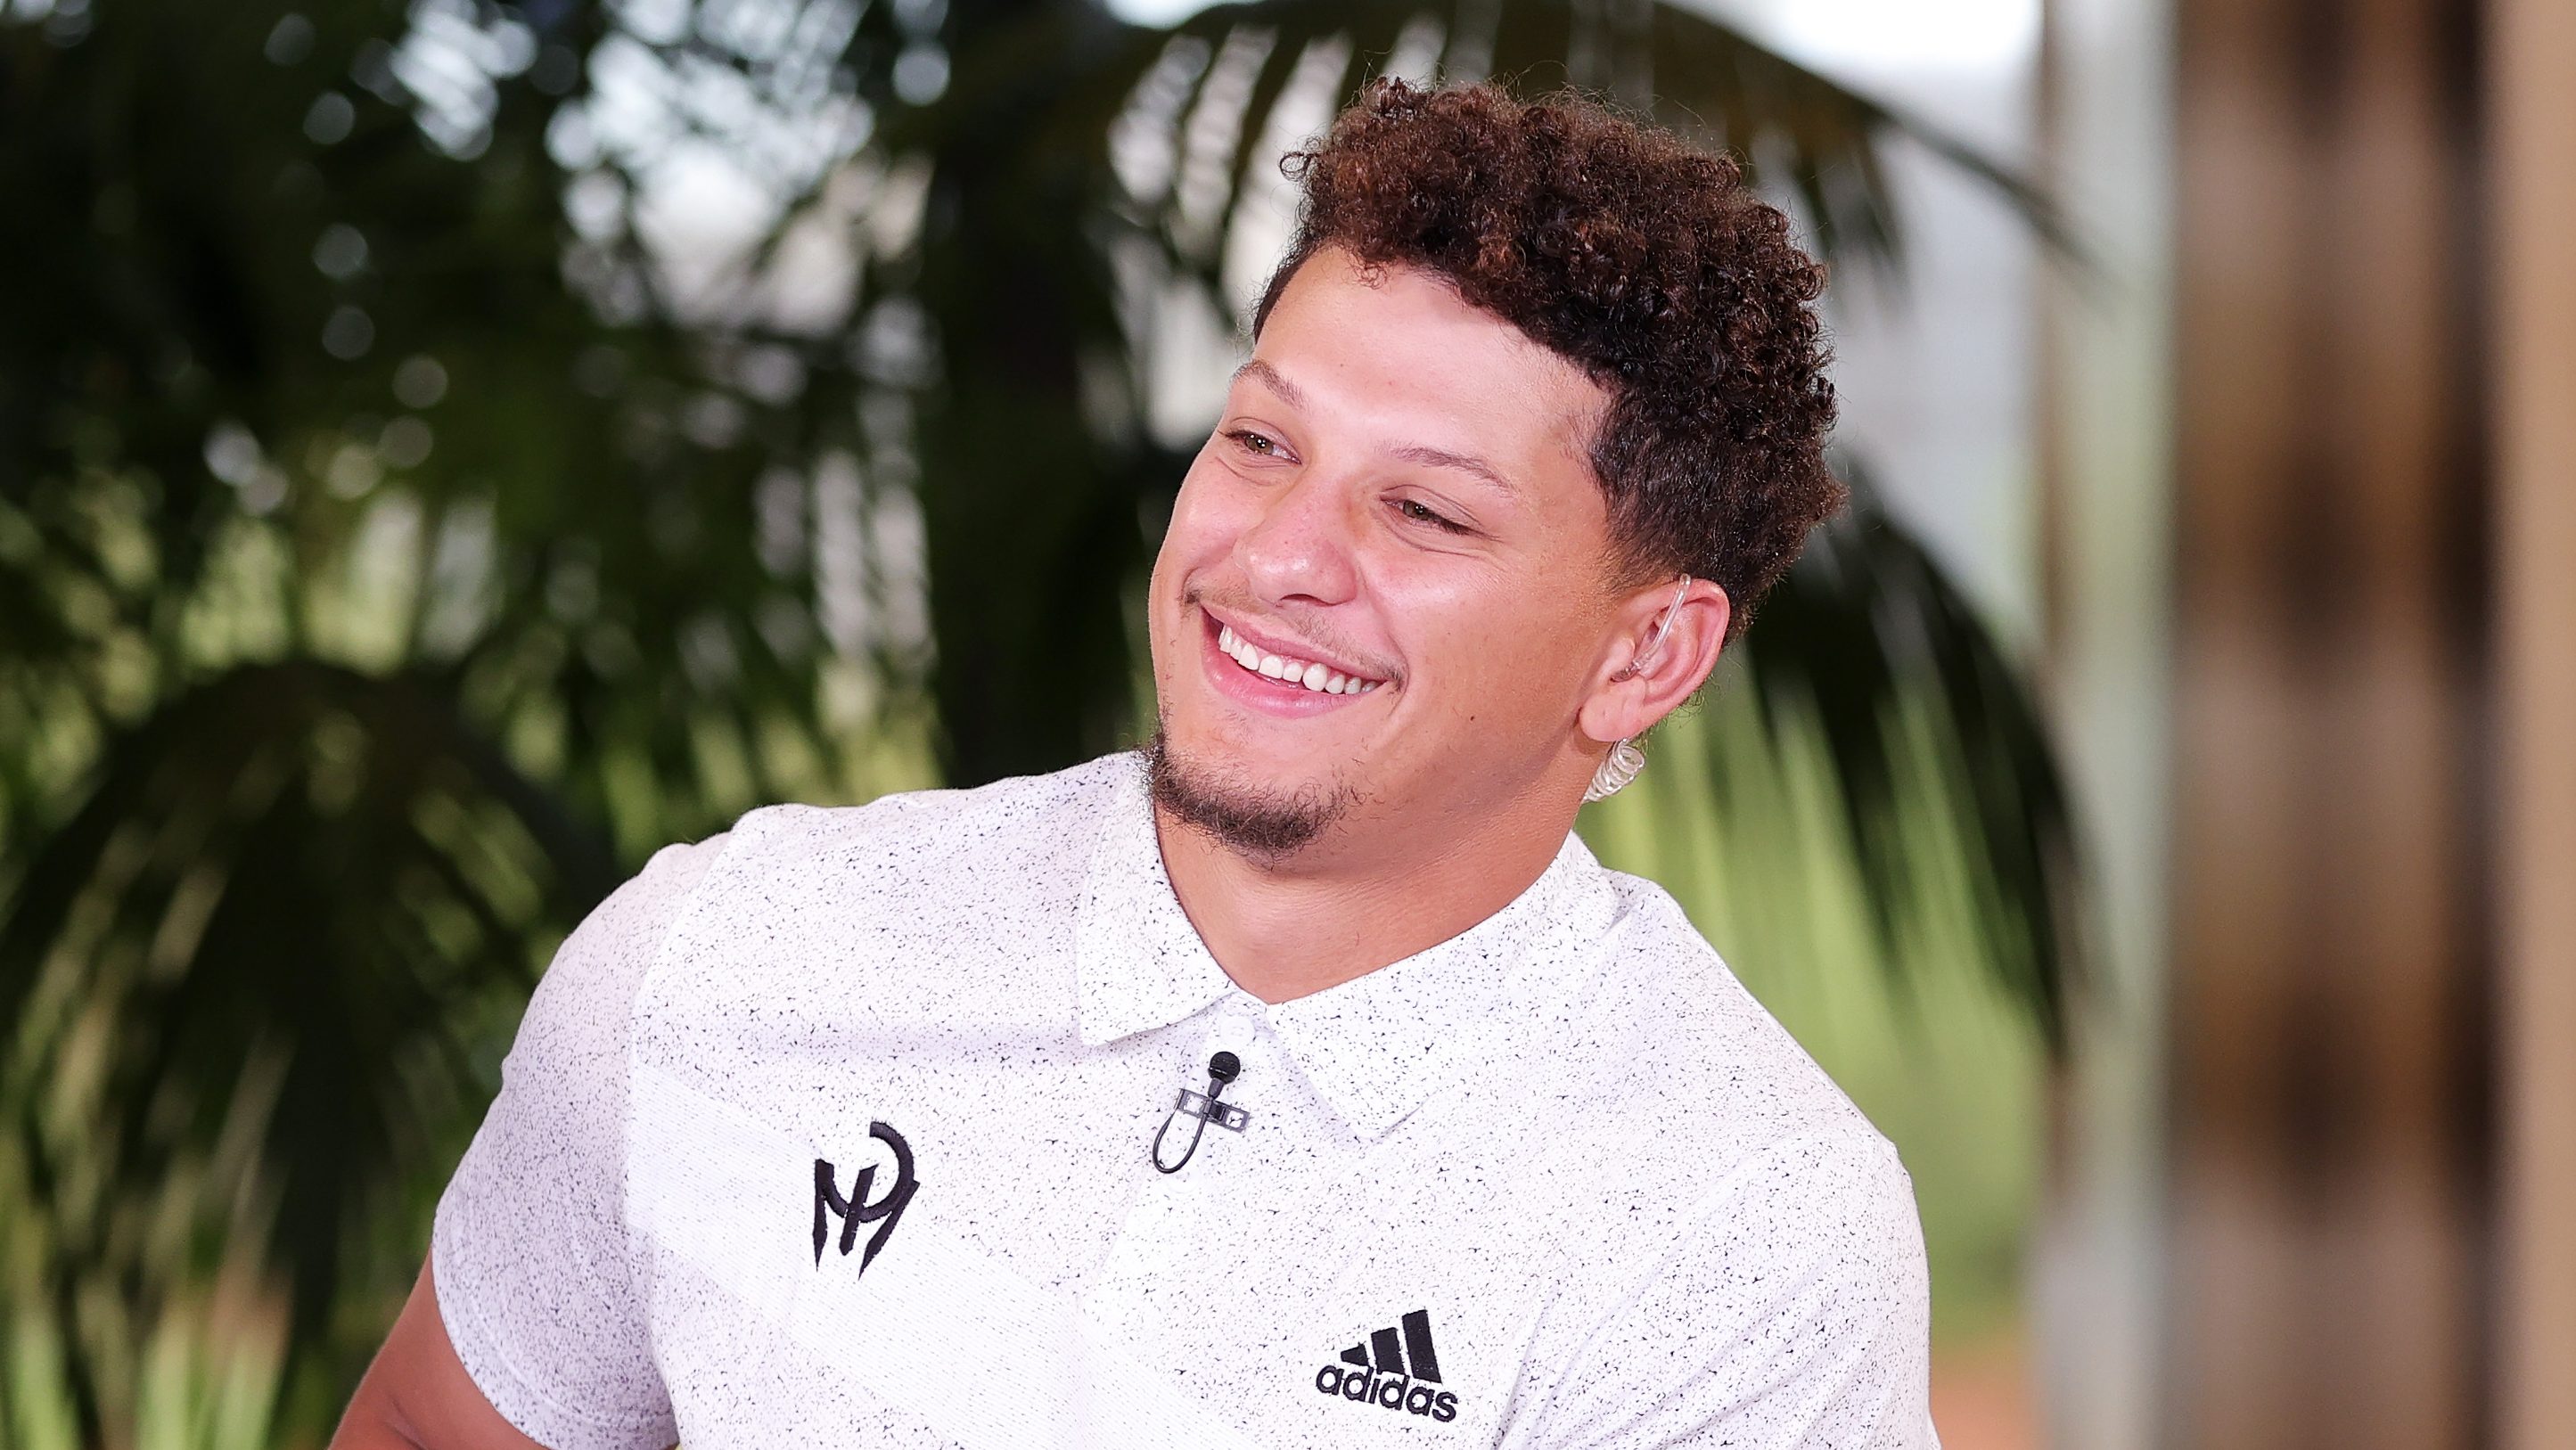 LOOK: Patrick Mahomes Shows off Stylish Suit in Arizona